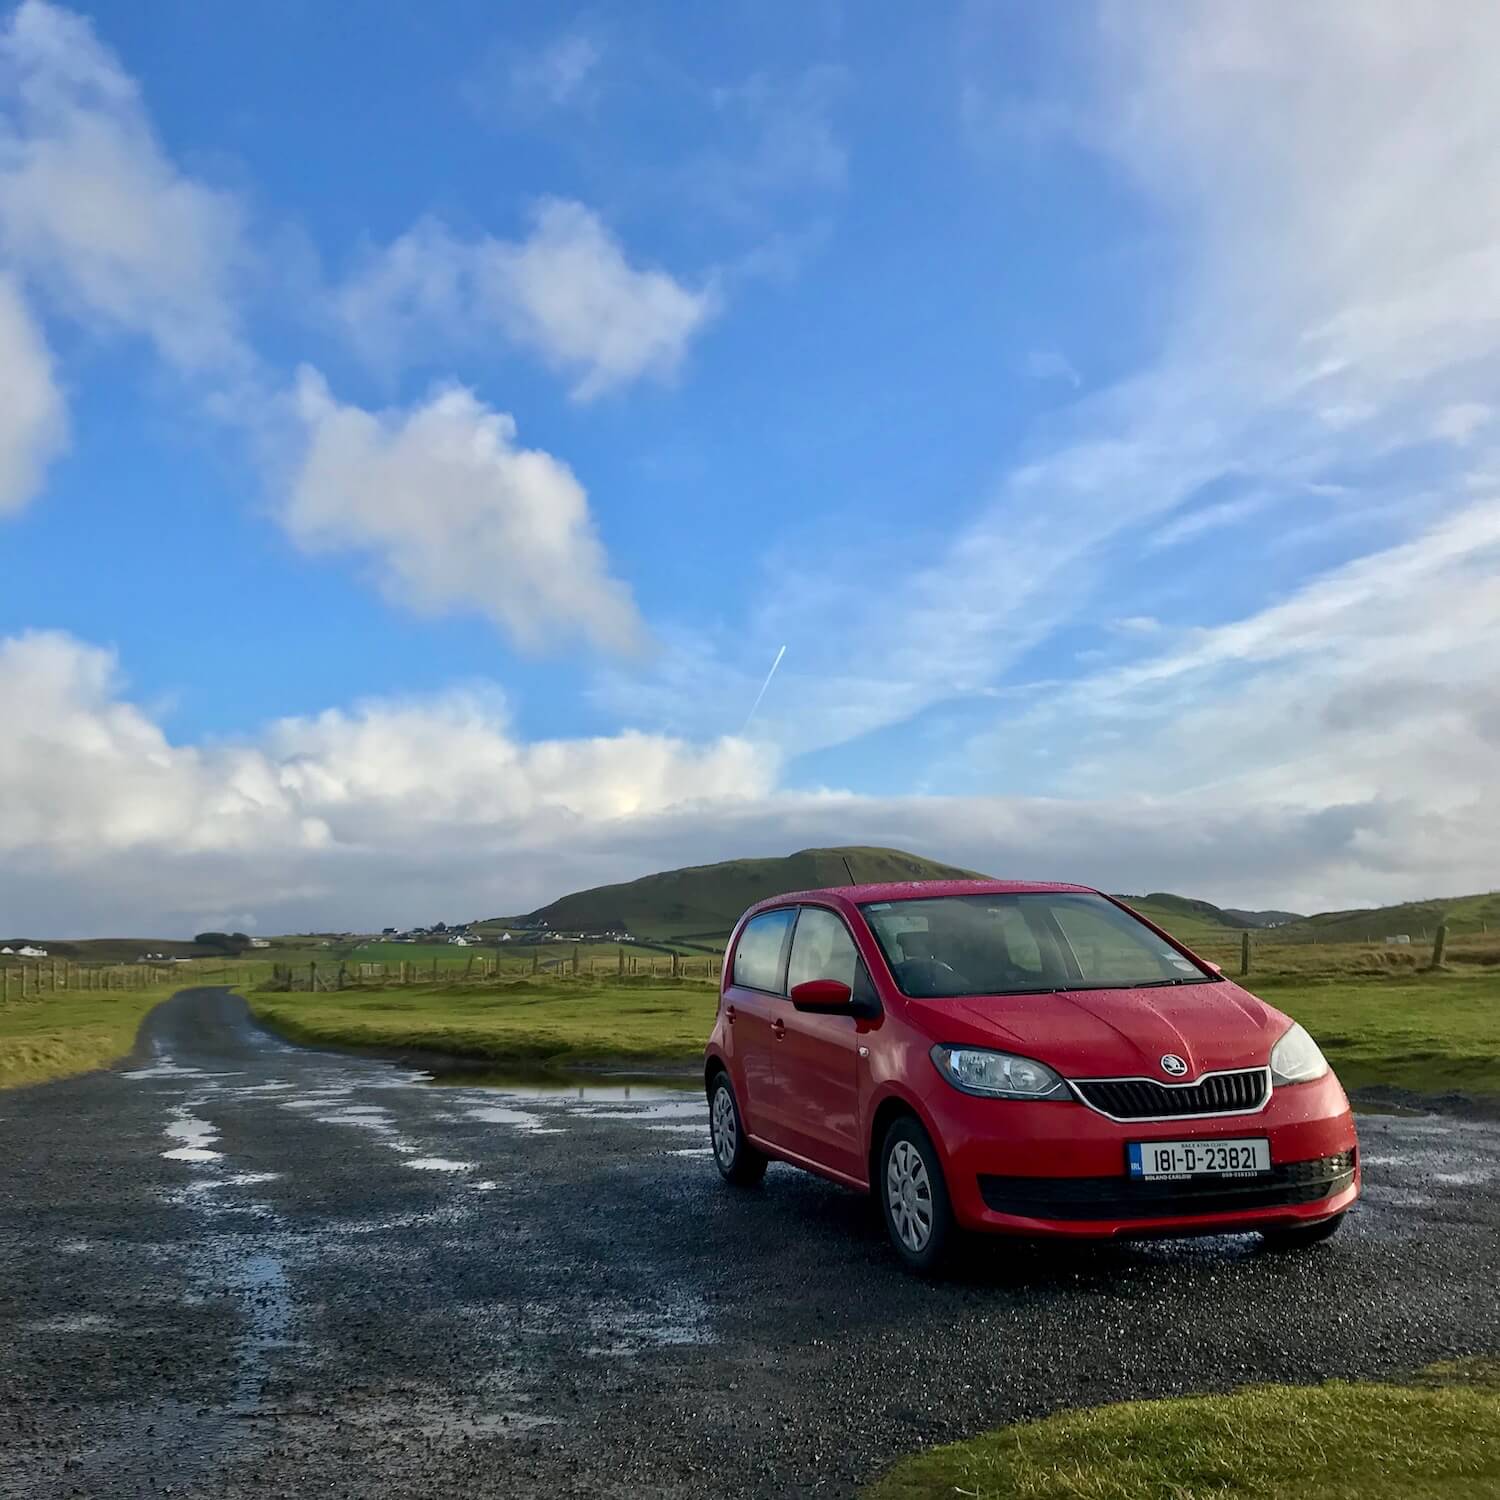 Red rental car on a county road in County Donegal, Ireland. Grassy hills and blue skies frame in the farmland.